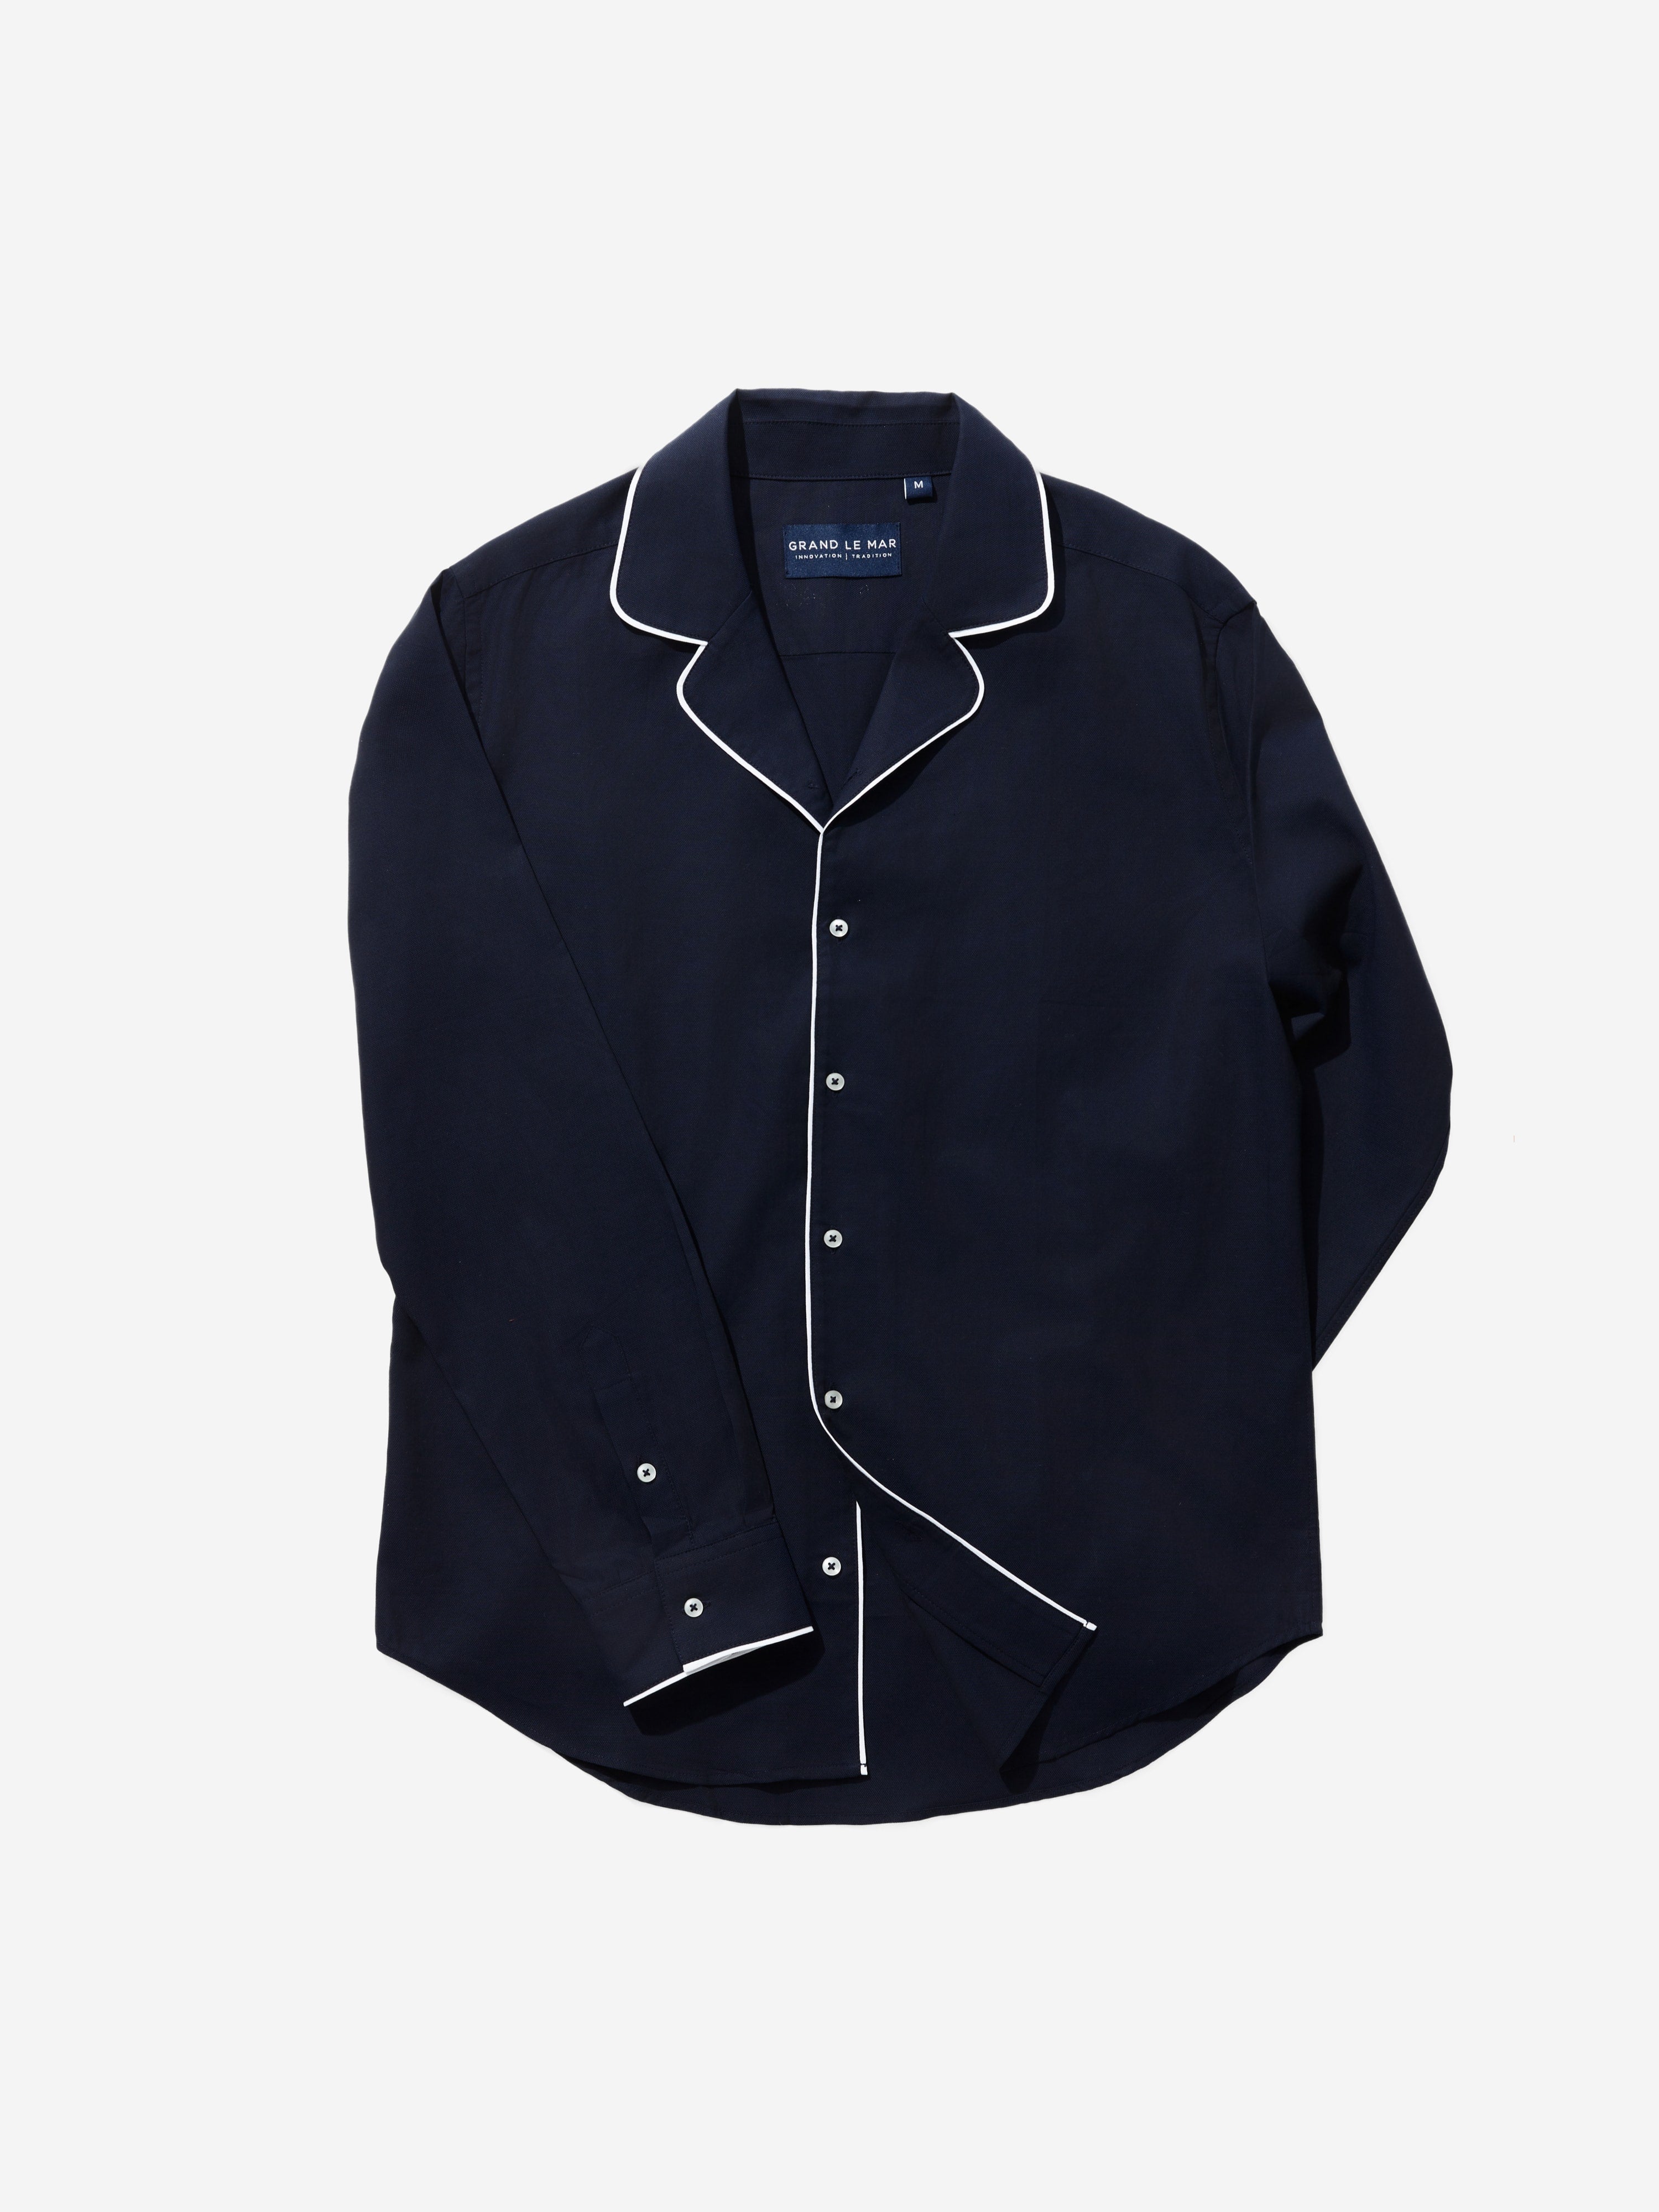 Riviera Piped Navy Blue Shirt - Grand Le Mar